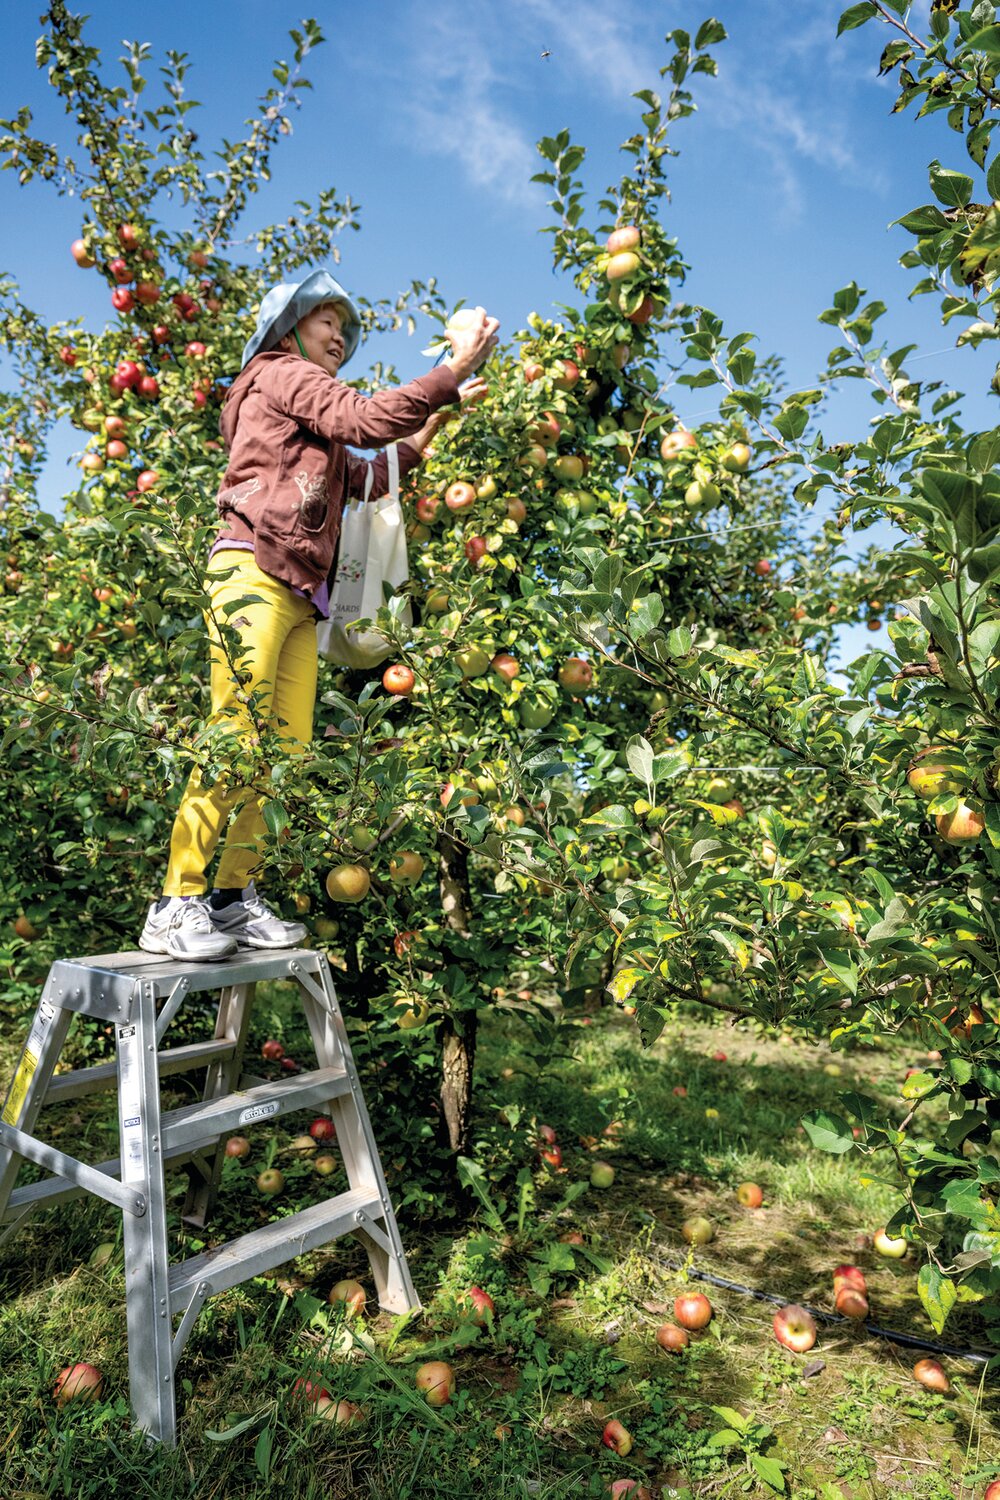 Lin Shen climbs atop a ladder for her selection of apples.